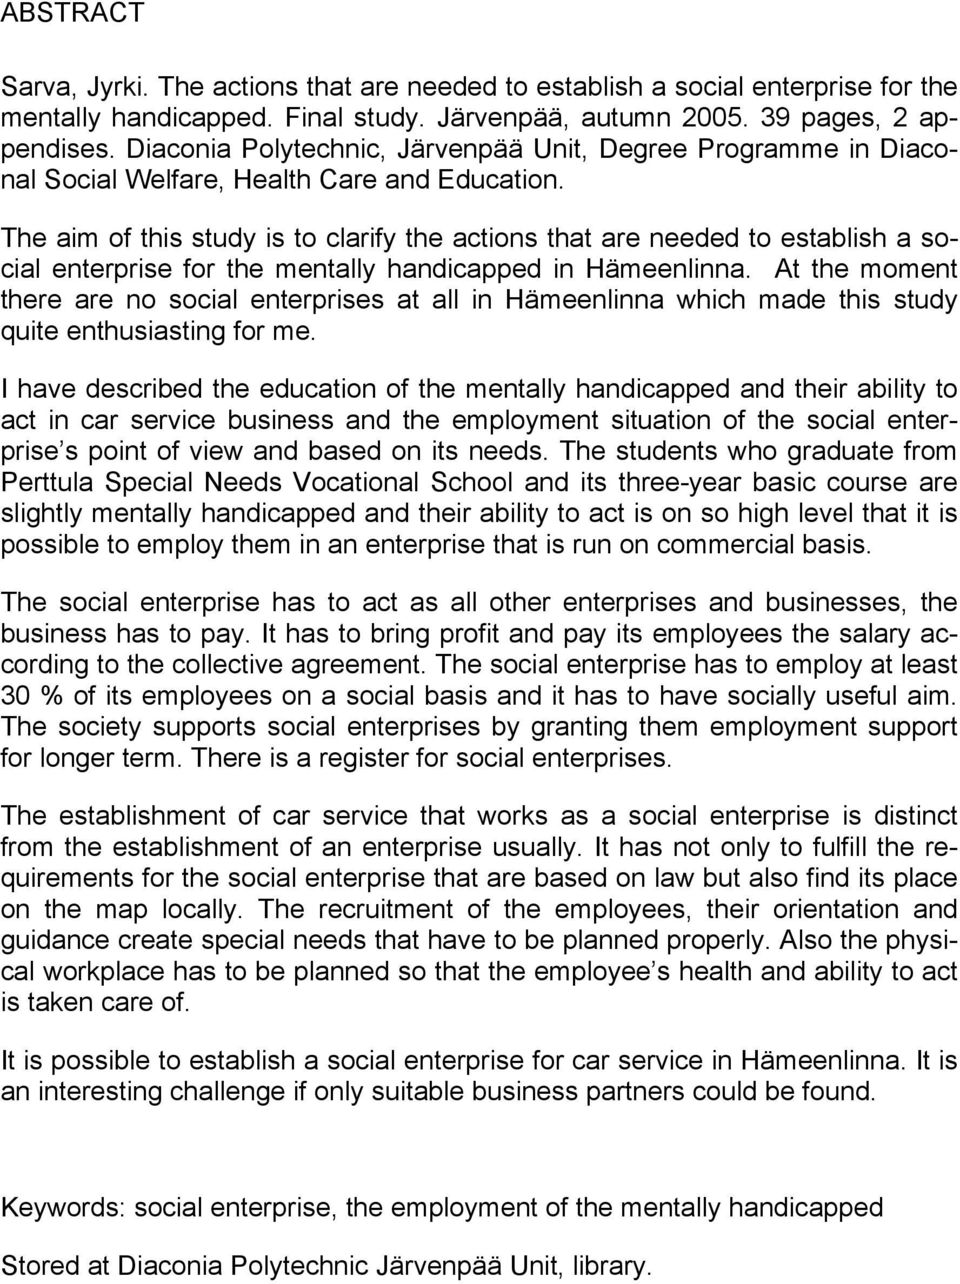 The aim of this study is to clarify the actions that are needed to establish a social enterprise for the mentally handicapped in Hämeenlinna.